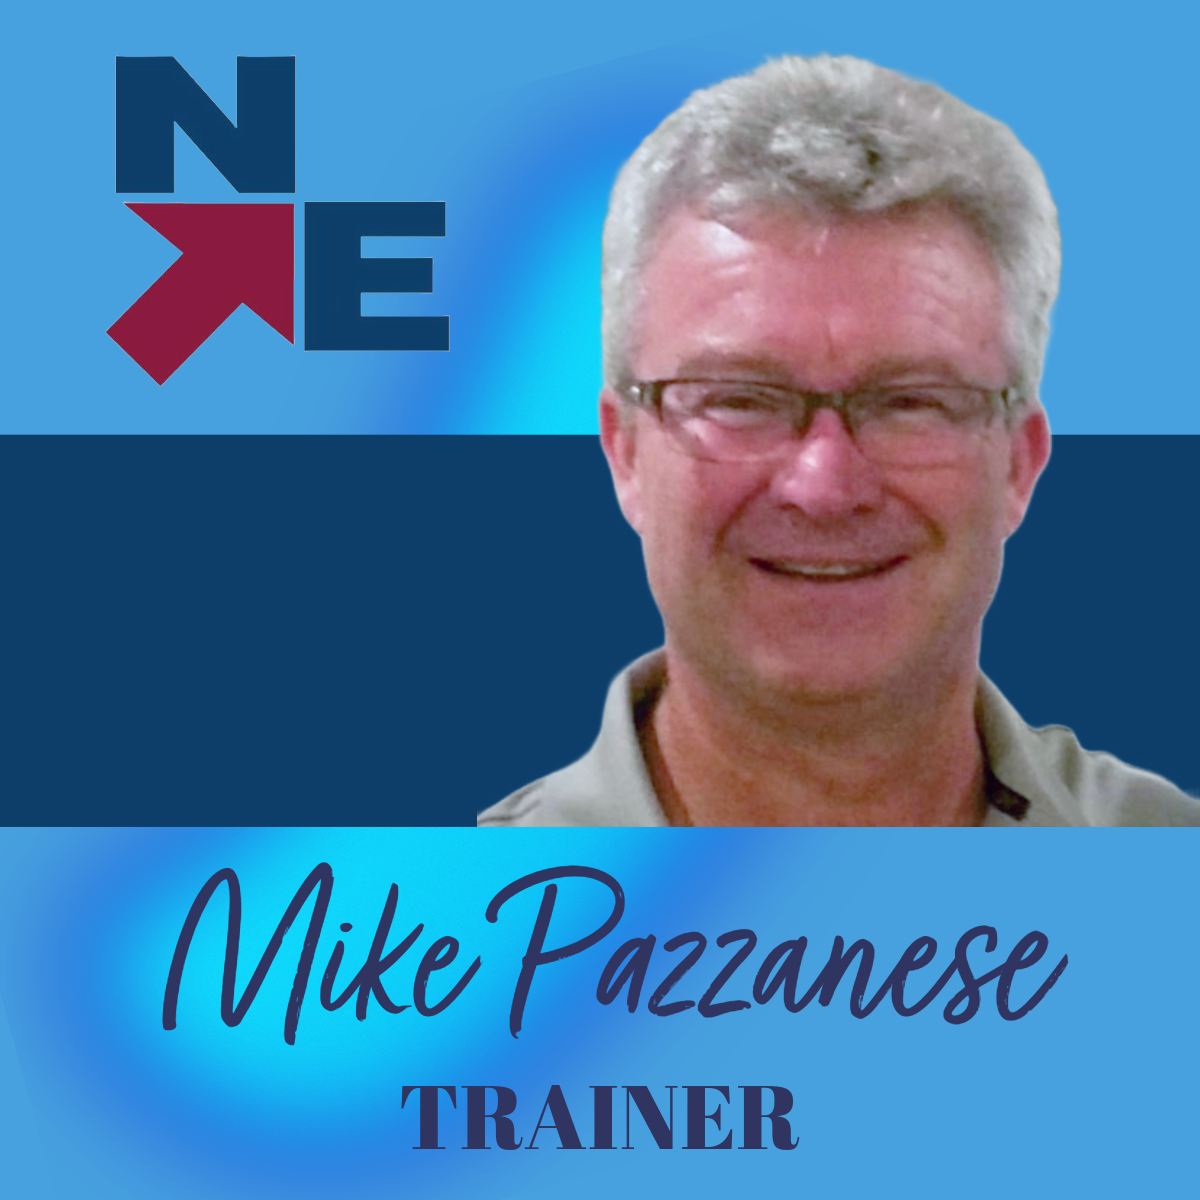 Mike Pazzanese